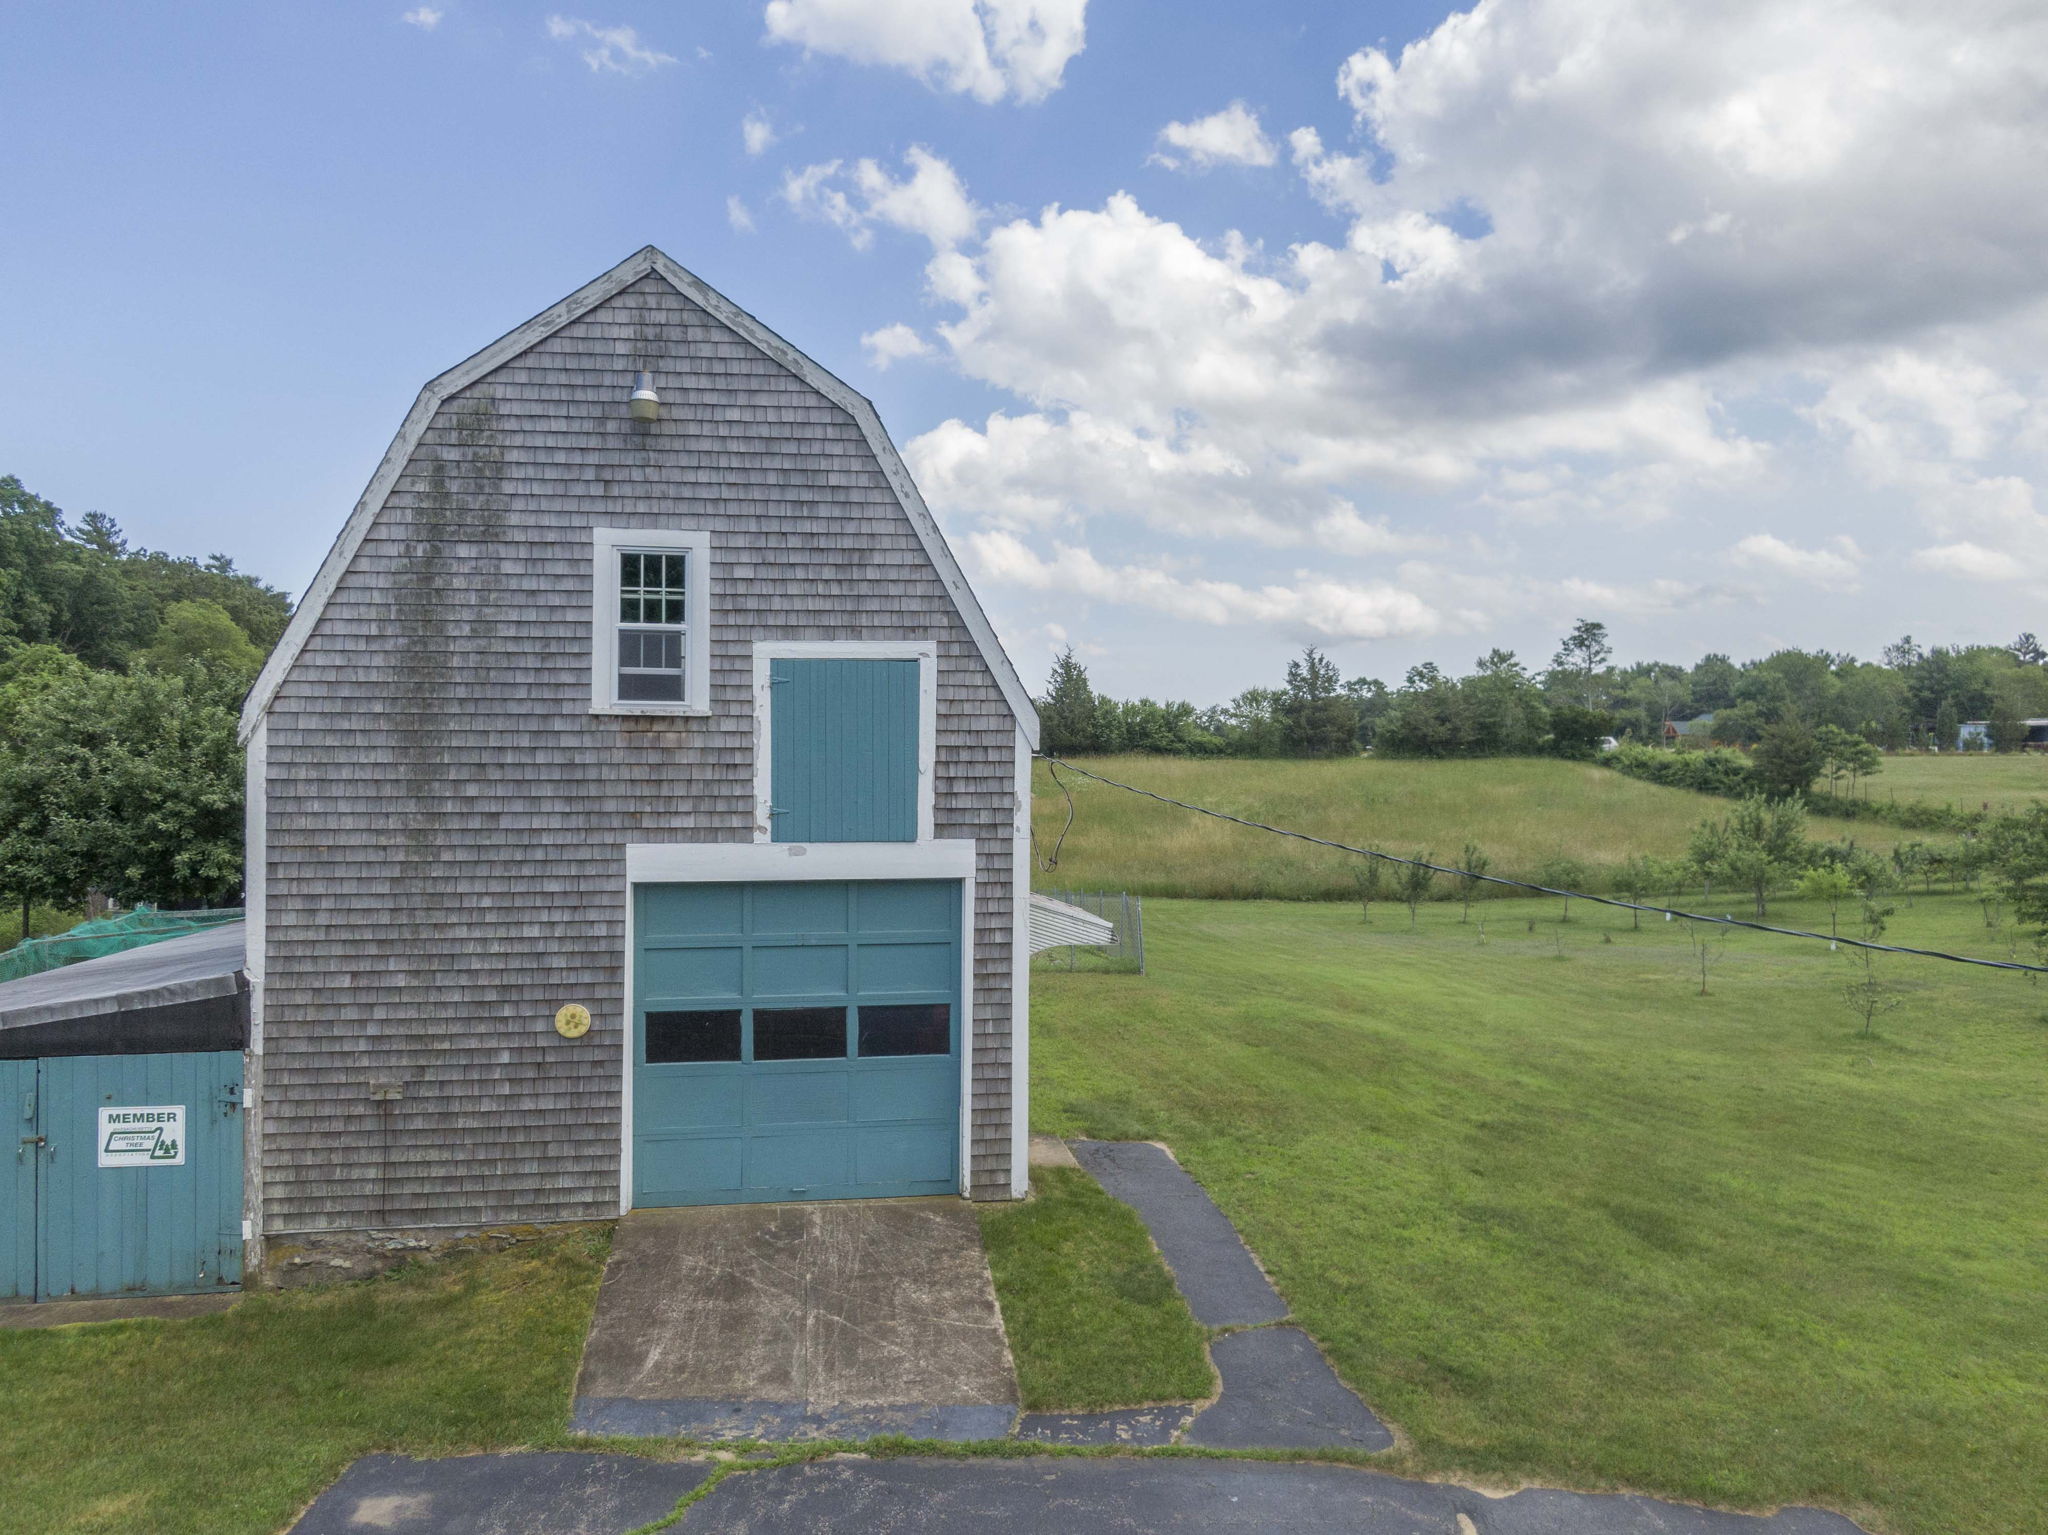  675 Plymouth St, Middleborough, MA 02346, US